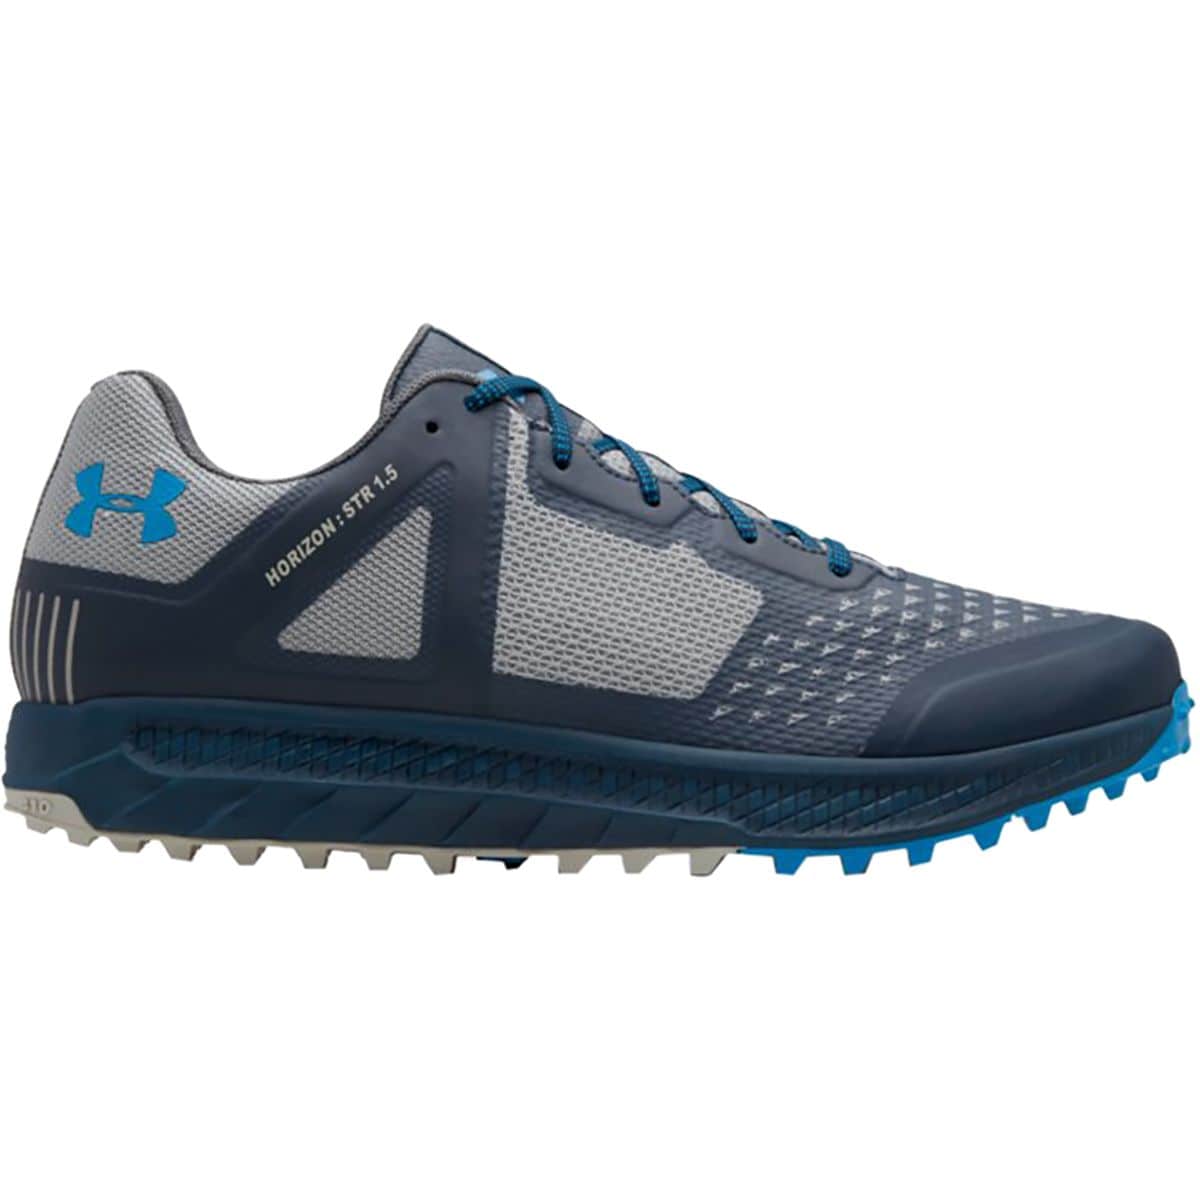 Are the Under Armour Horizon Str Running Shoes Waterproof?